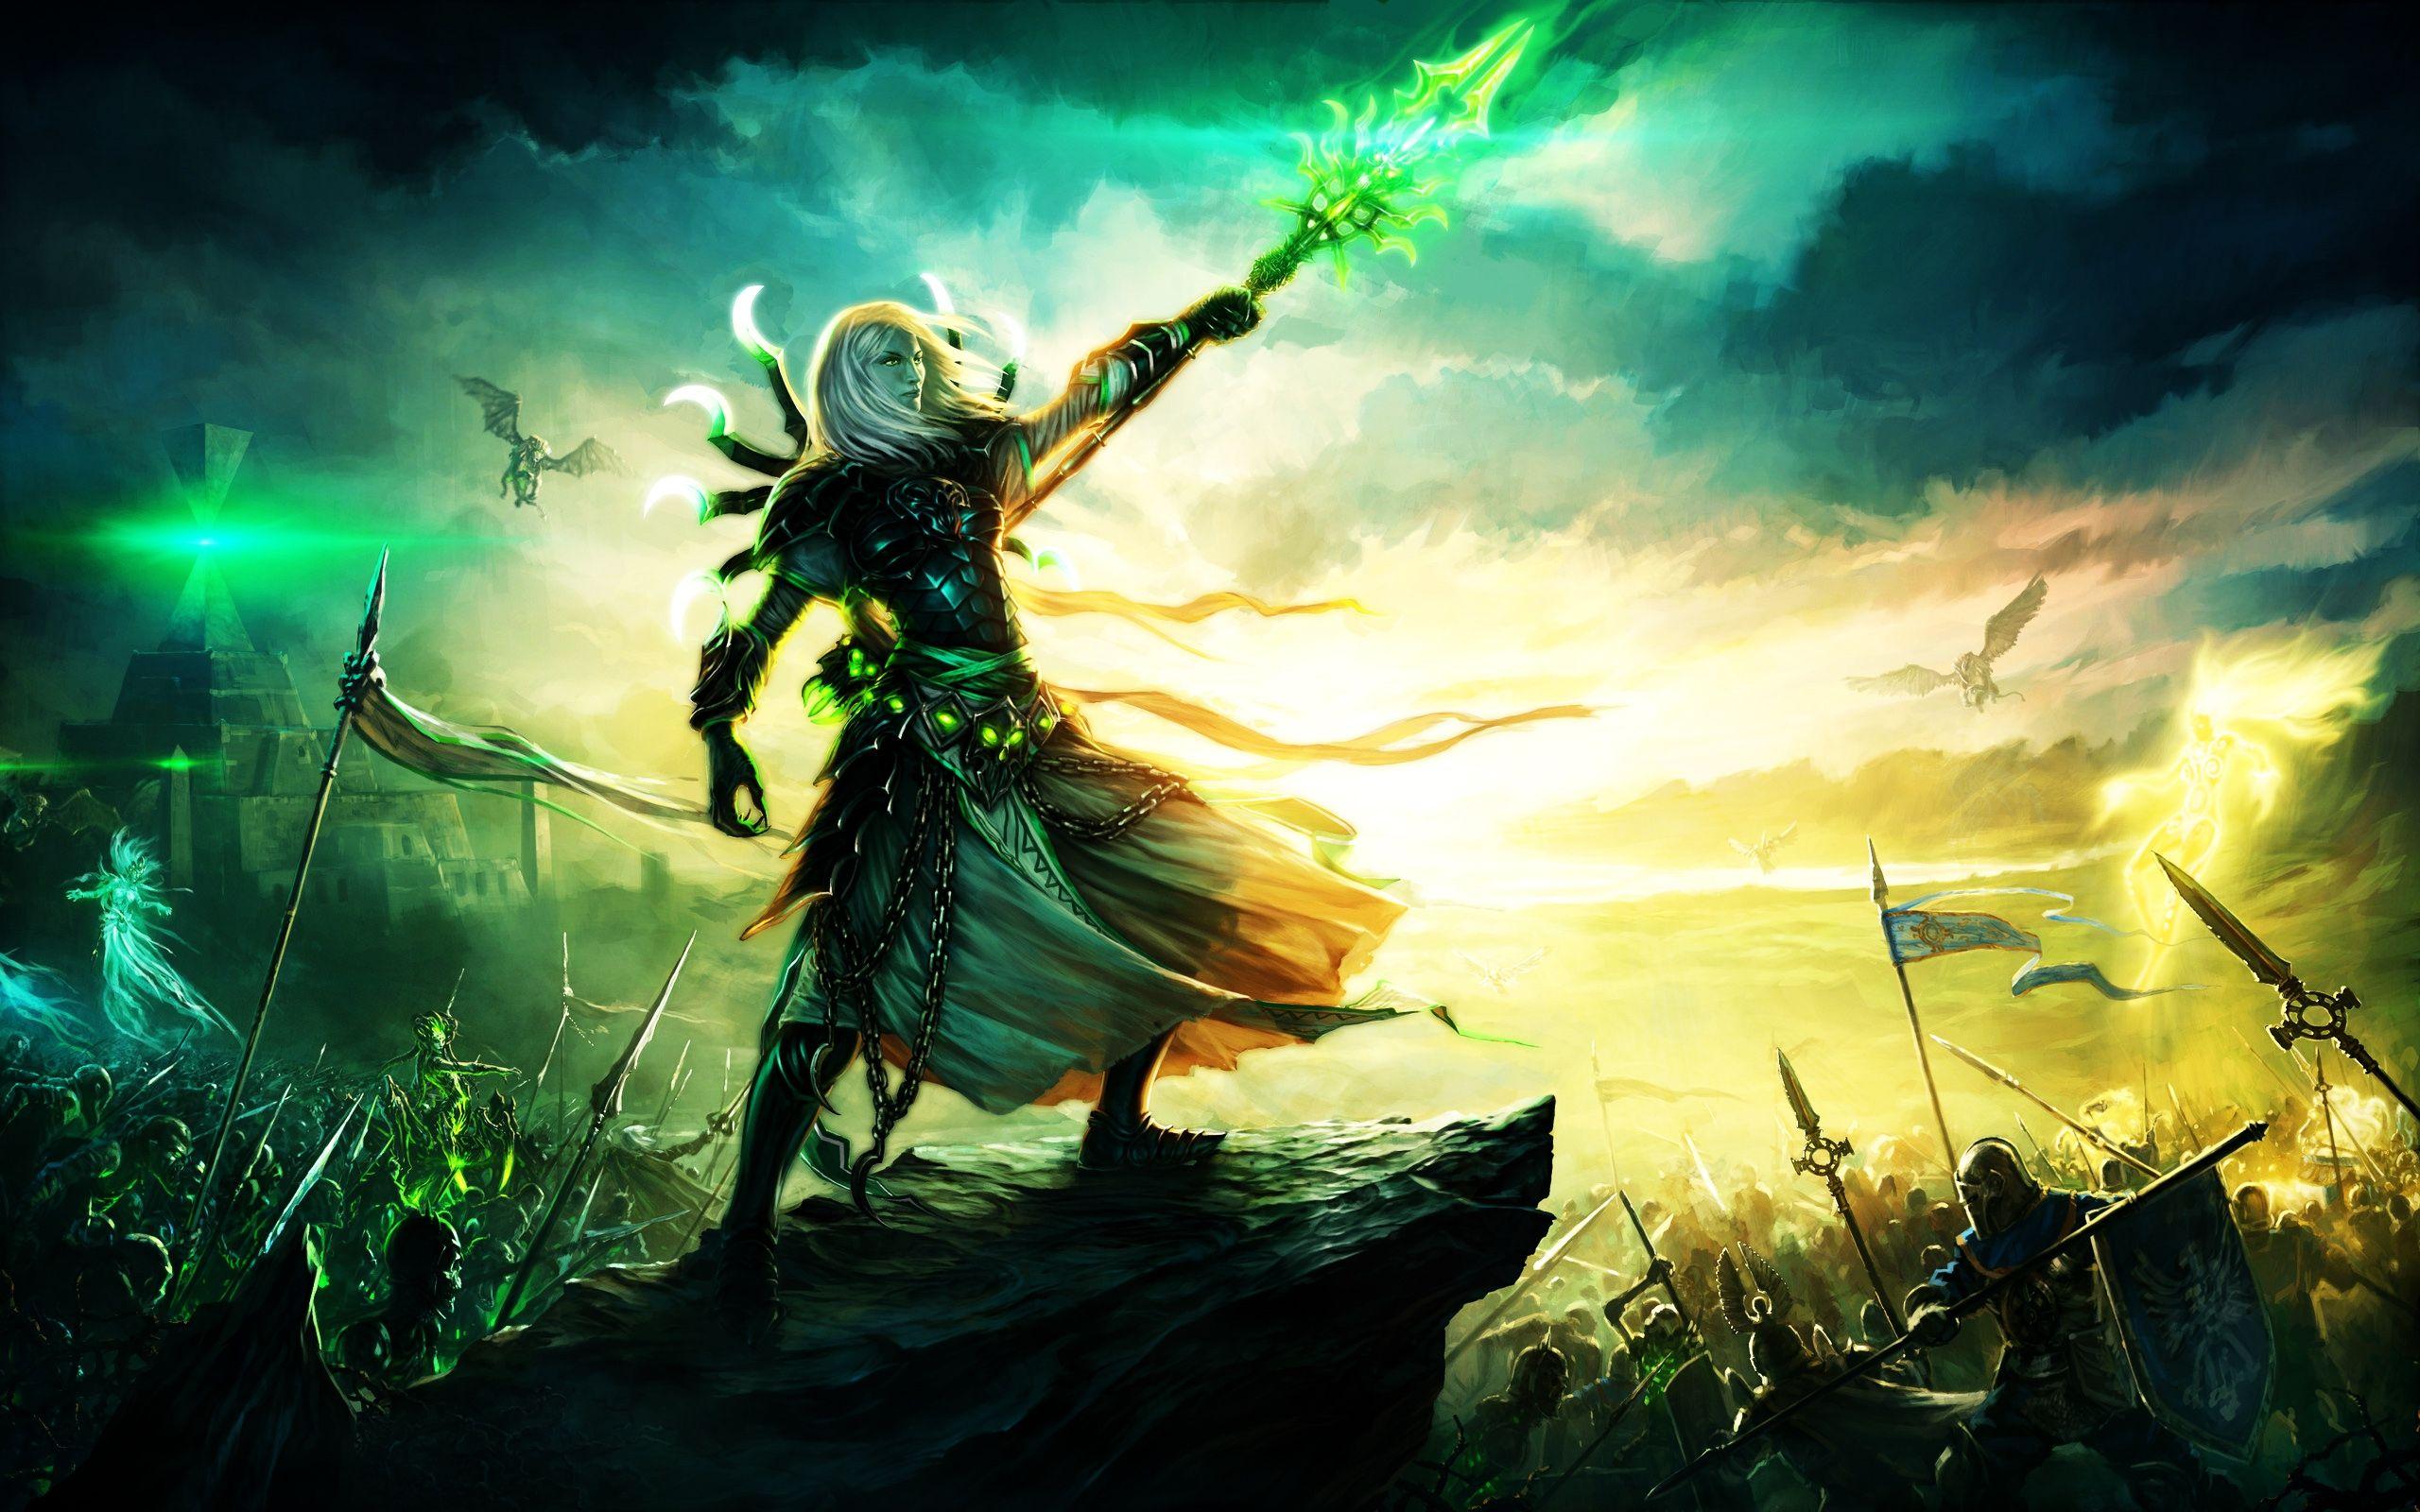 Epic Fantasy Wallpaper For Android Free Download > SubWallpaper